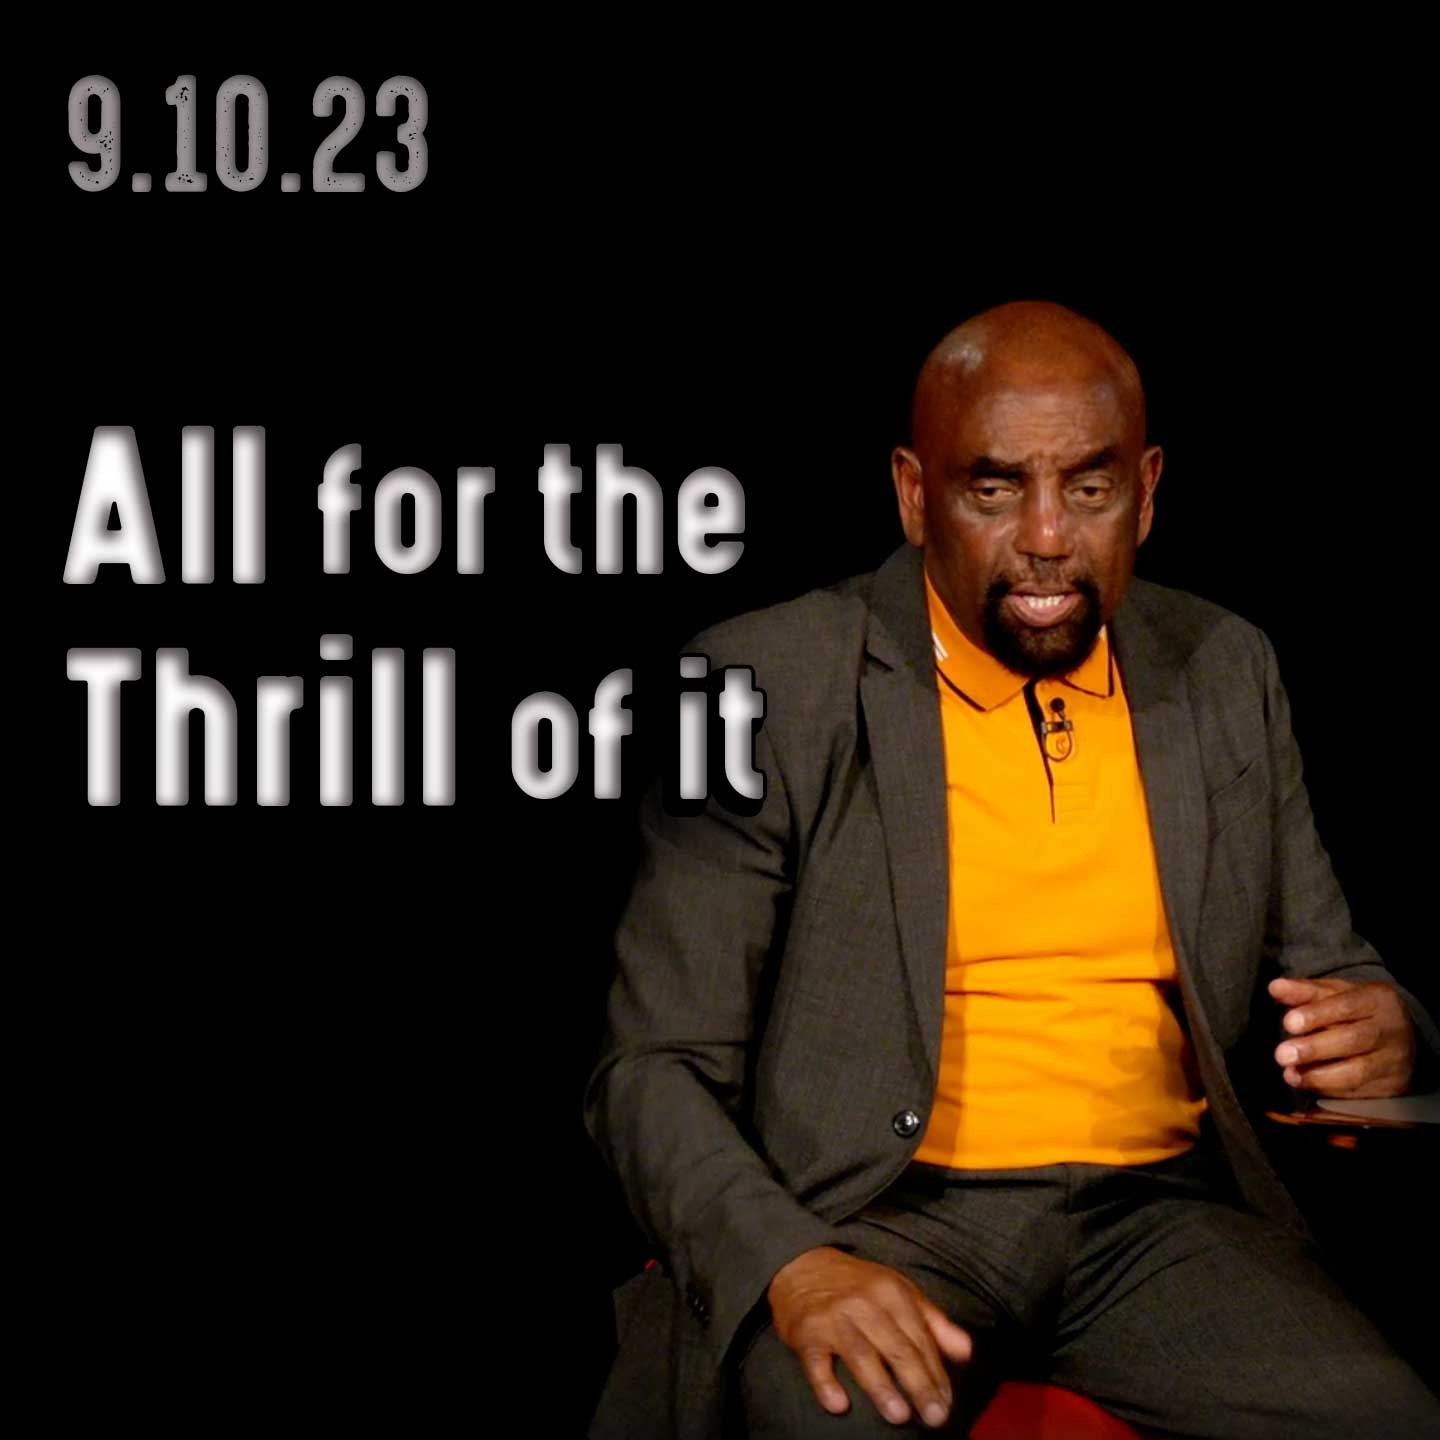 Are you a thrill seeker? Church 9/10/23 (All for the thrill of it)